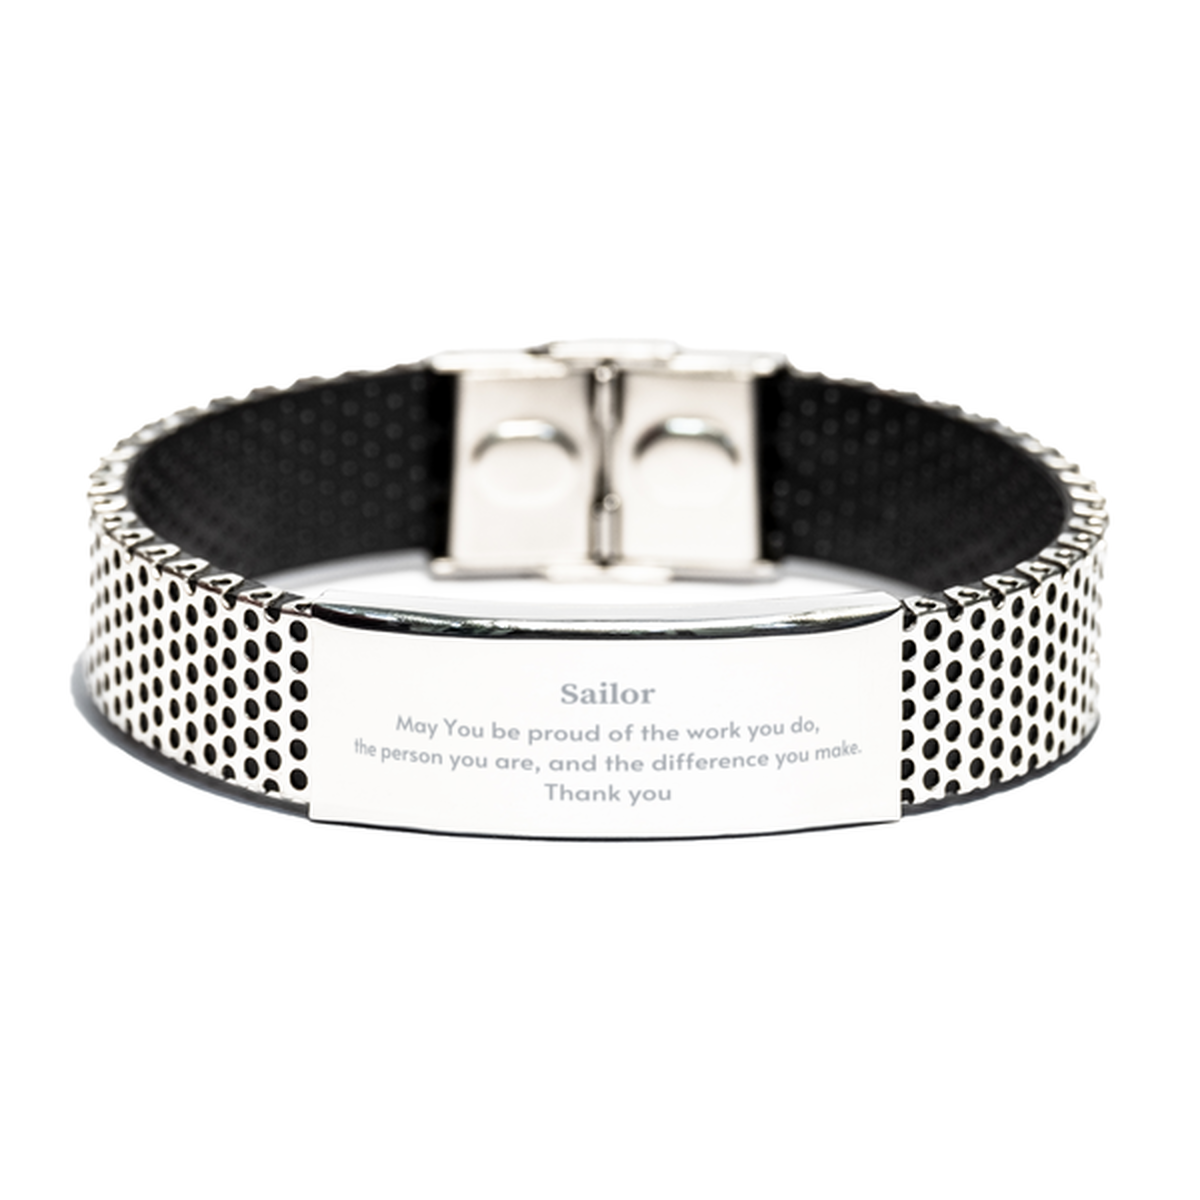 Heartwarming Stainless Steel Bracelet Retirement Coworkers Gifts for Sailor, Sailor May You be proud of the work you do, the person you are Gifts for Boss Men Women Friends